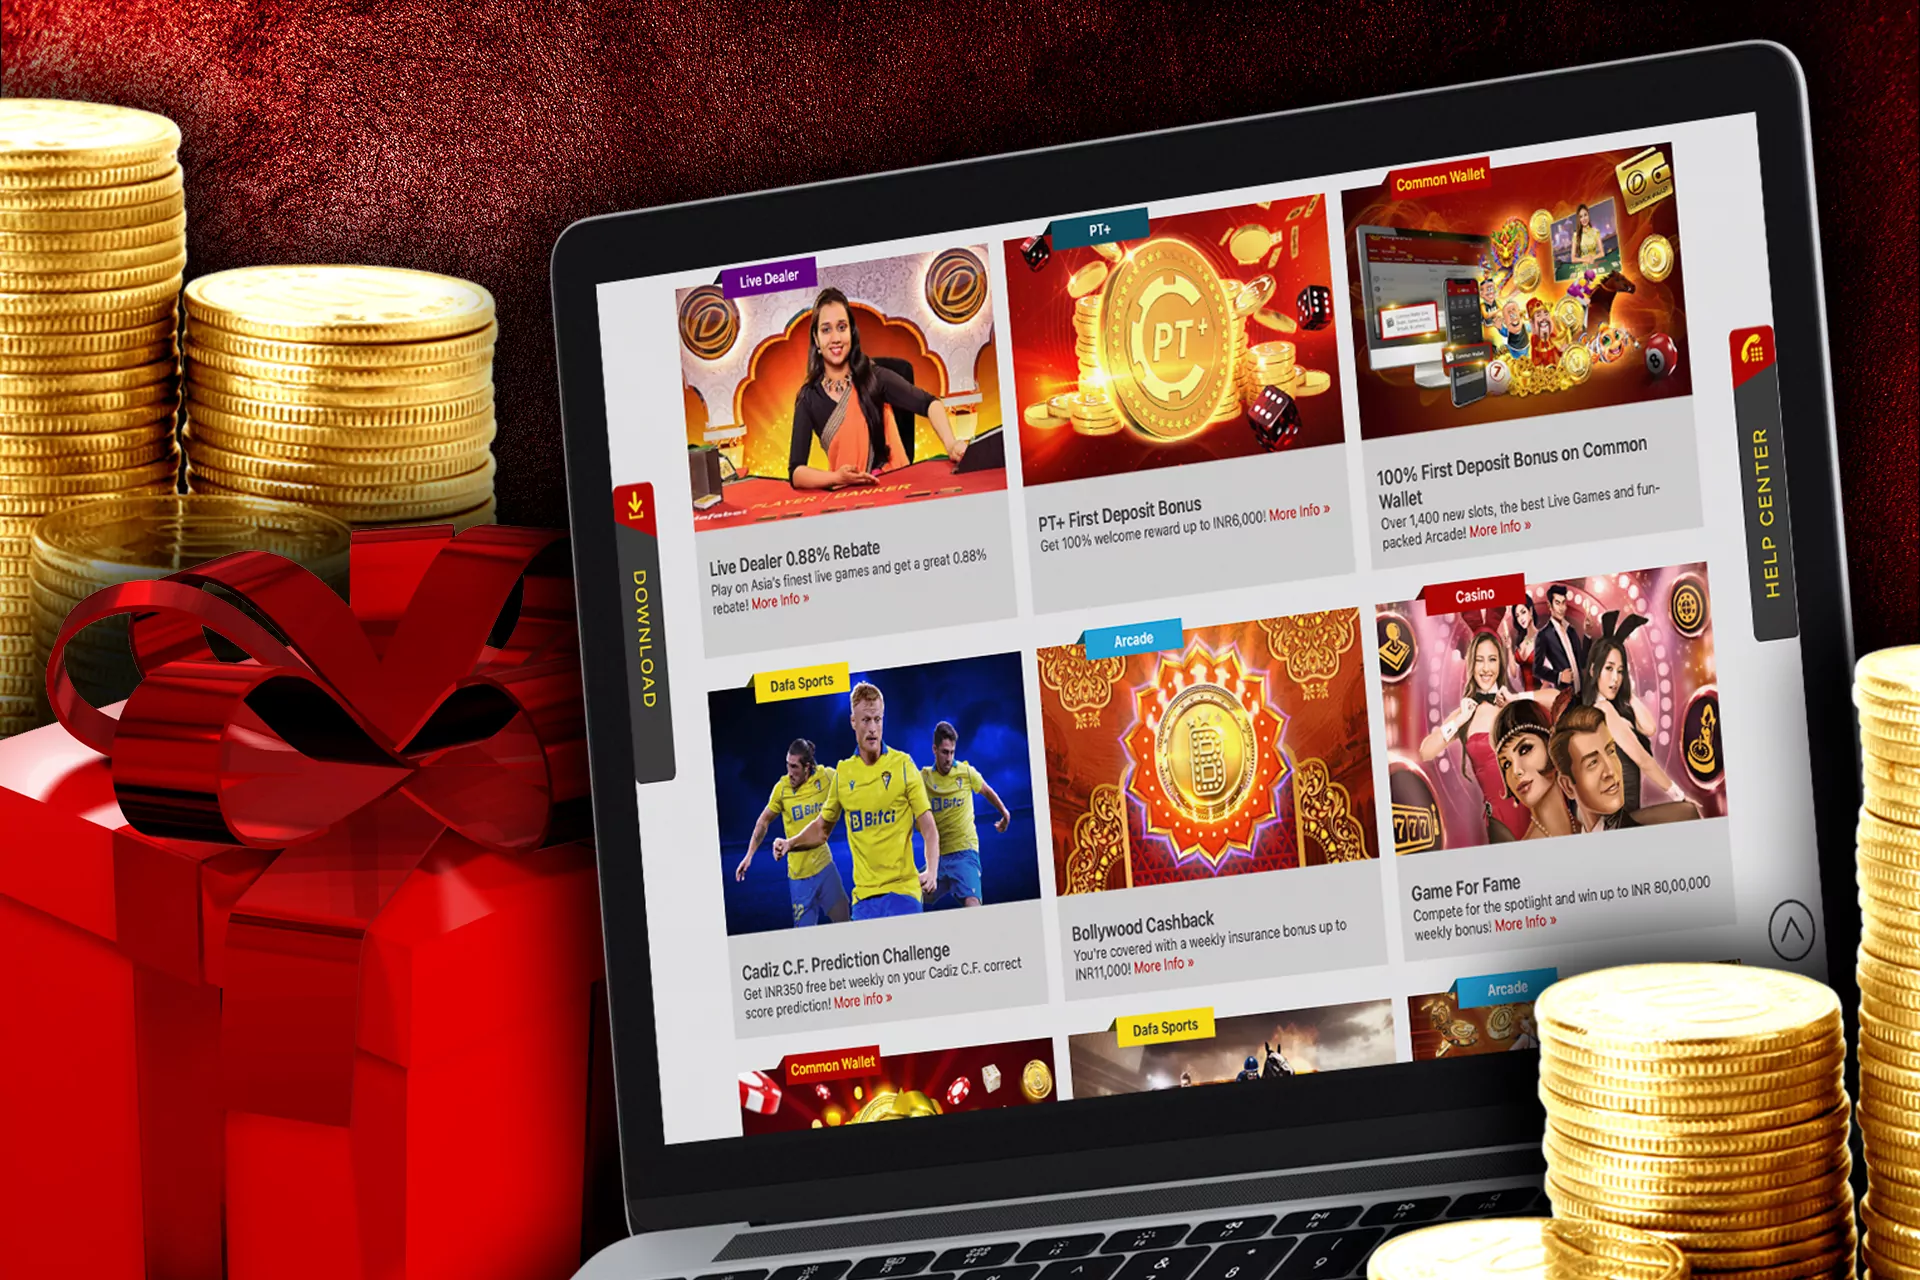 If you are not already a new user at Dafabet, you may pay attention to other promotions and bonus offers.